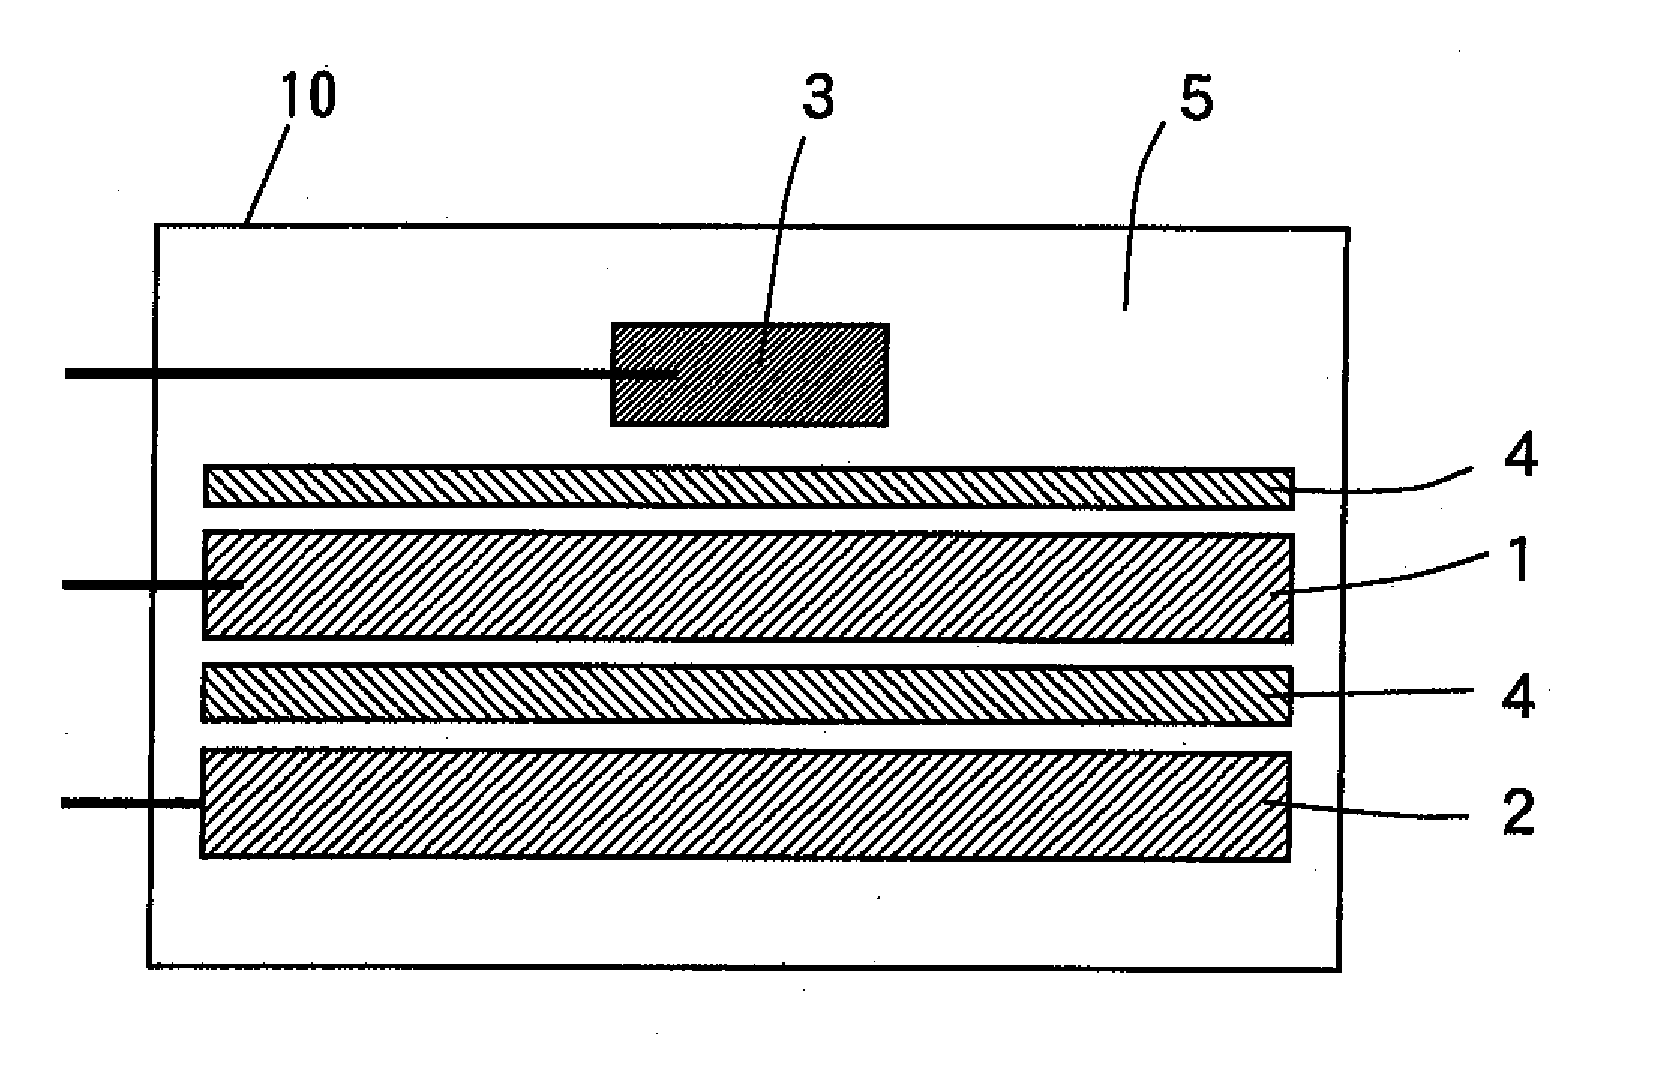 Nonaqueous electrolyte secondary battery and method of manufacturing the same